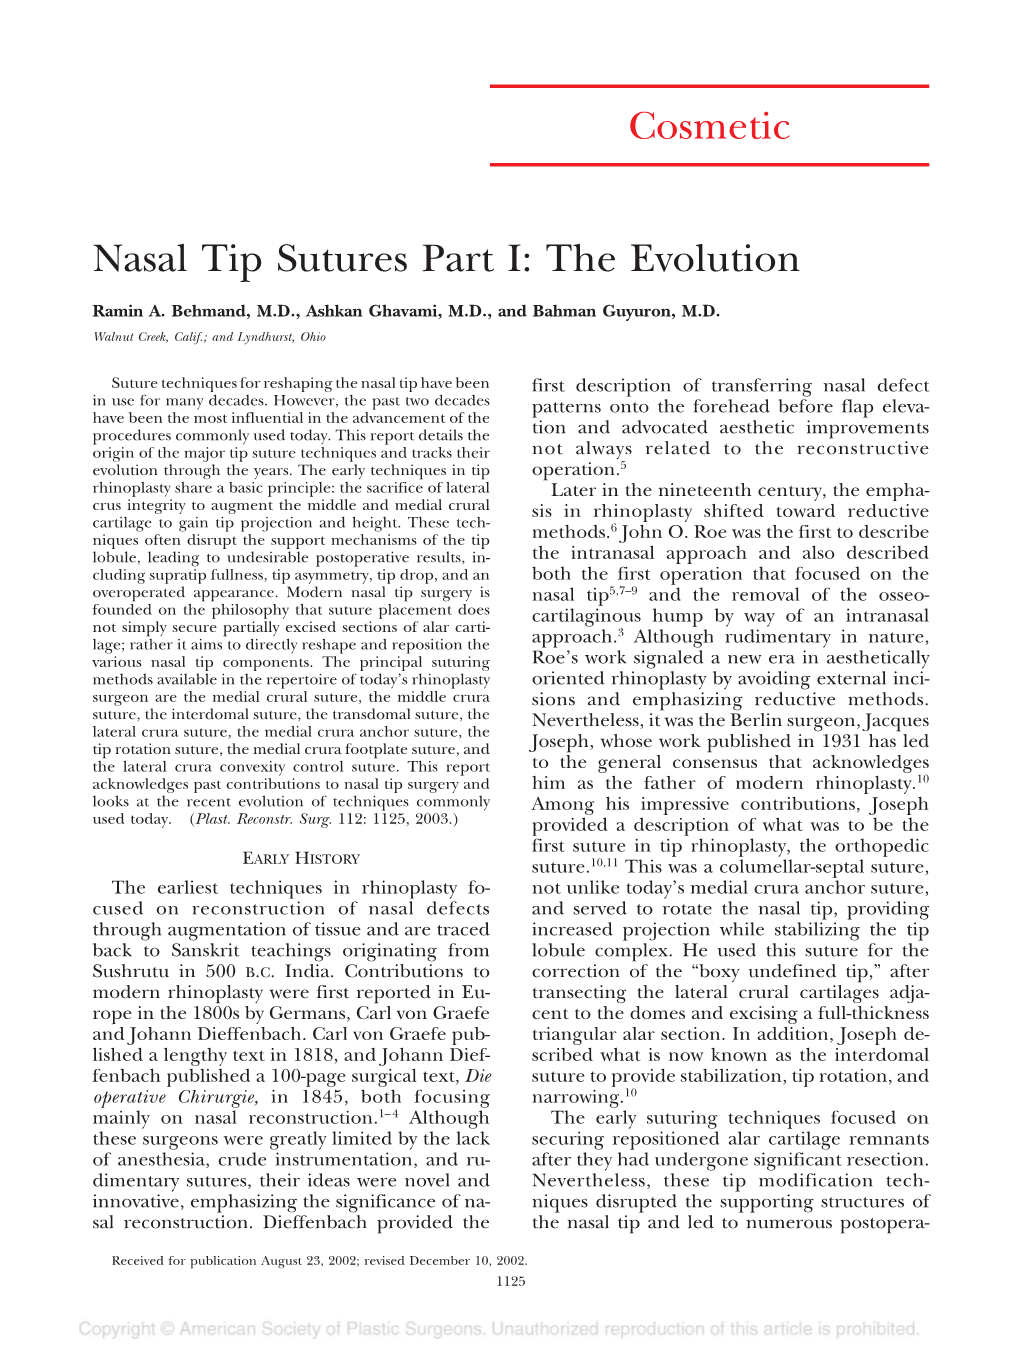 Cosmetic Nasal Tip Sutures Part I: the Evolution